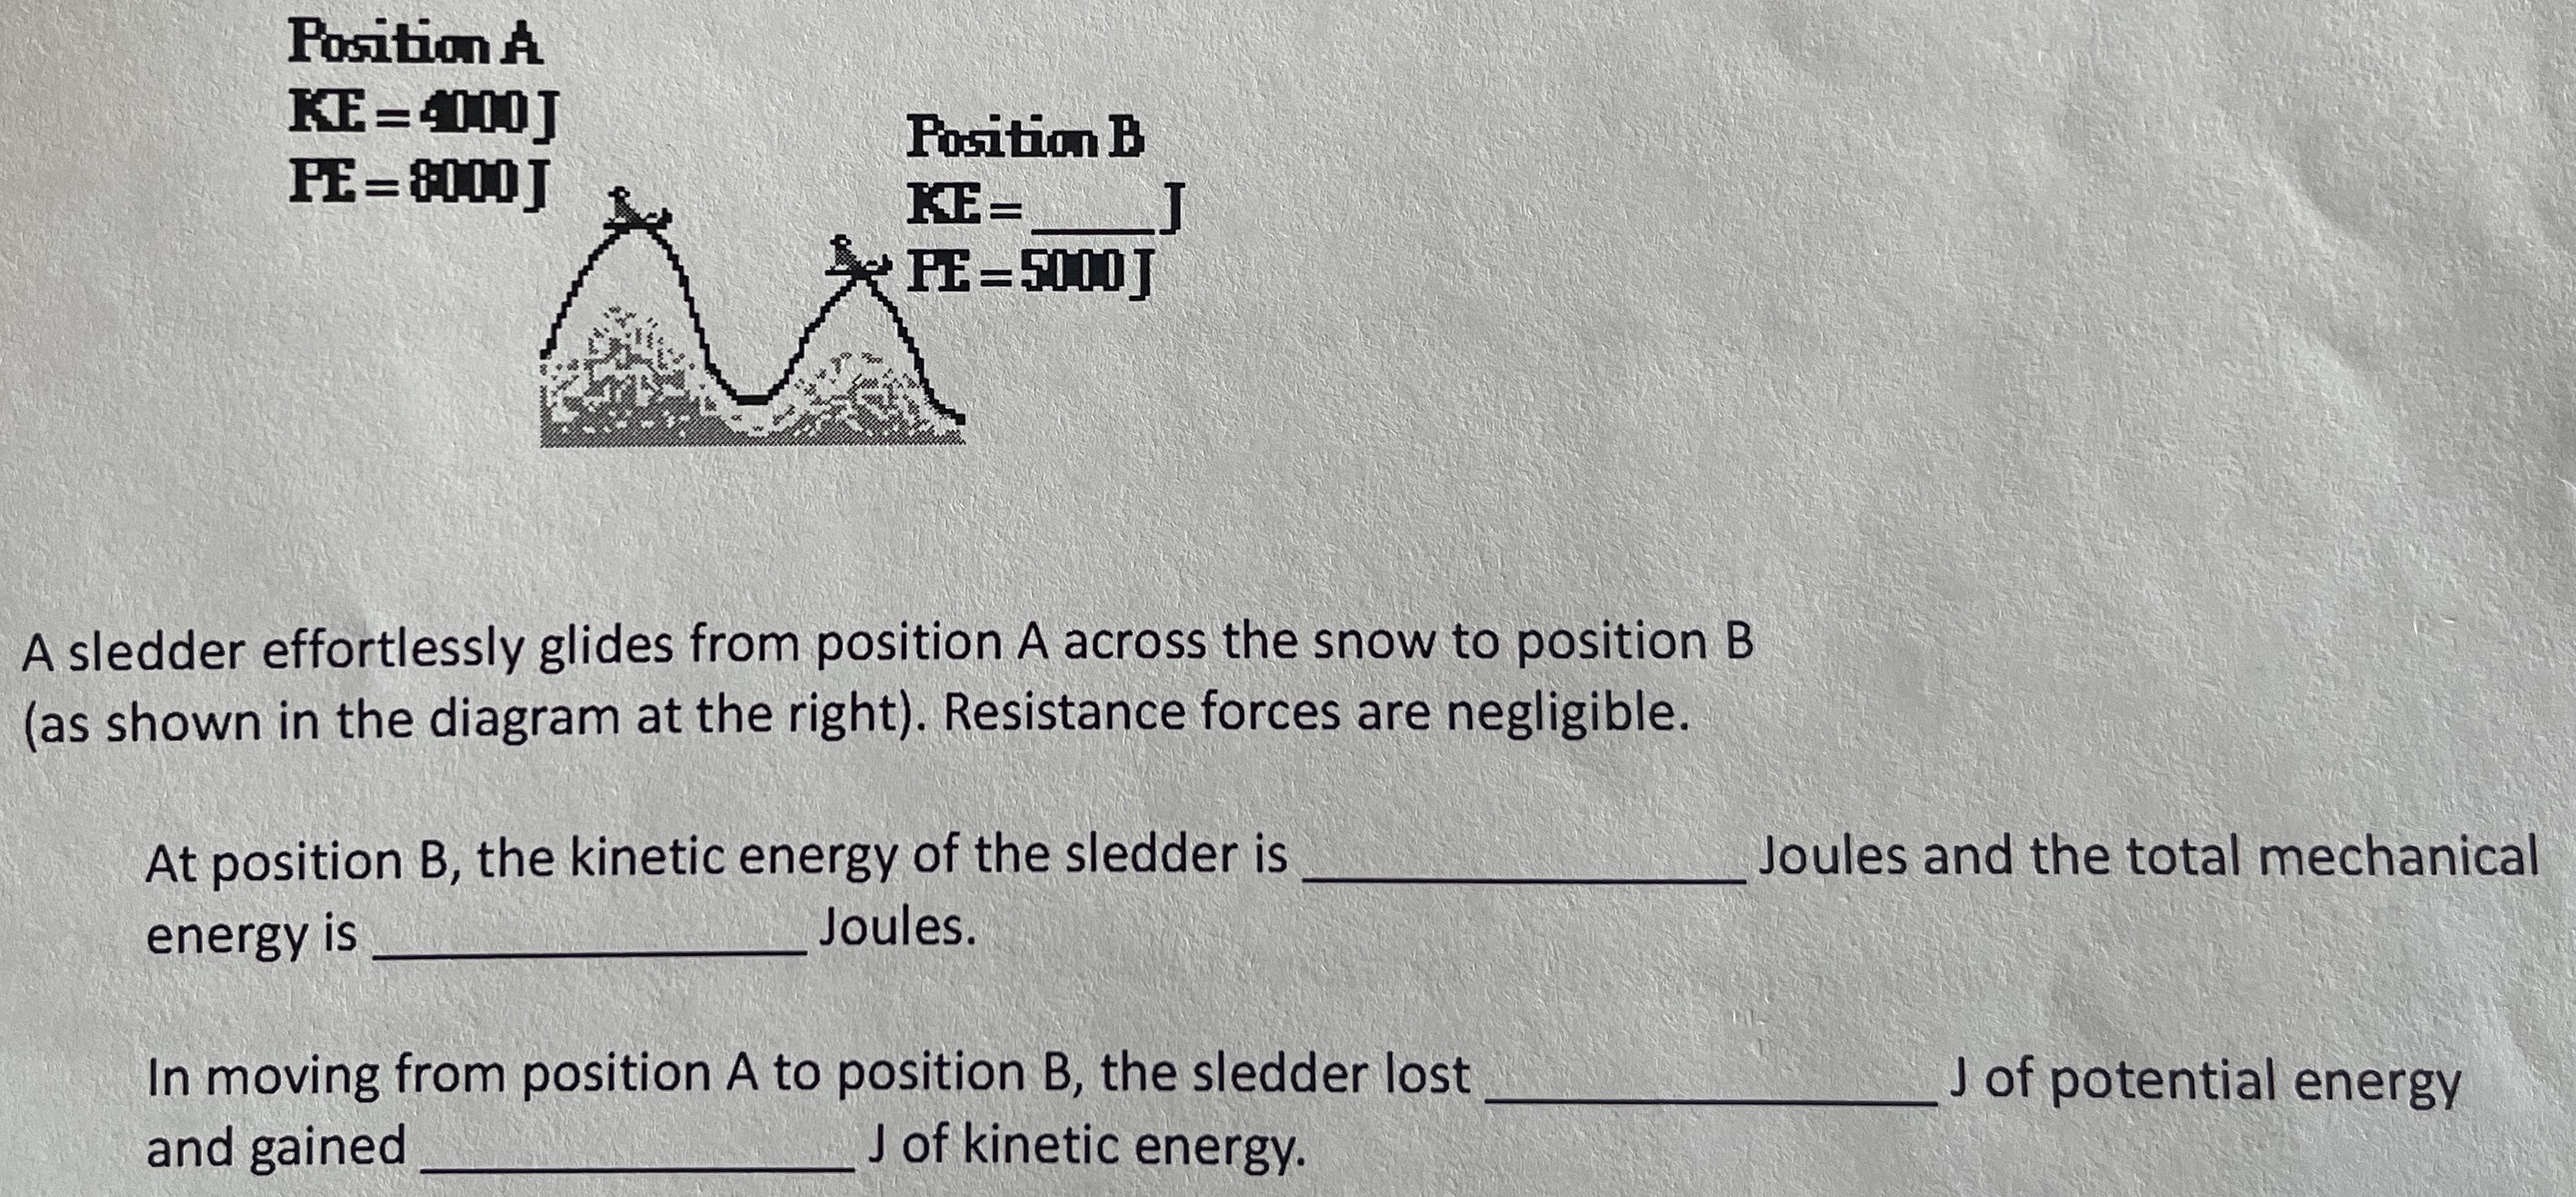 A sledder effortlessly glides from position A across the snow to position B (as shown in the diagram at the right). Resistance forces are negligible. At position B, the kinetic energy of the sledder is Joules and the total mechanical energy is Joules. In moving from position A to position B, the sledder lost J of potential energy and gained J of kinetic energy.